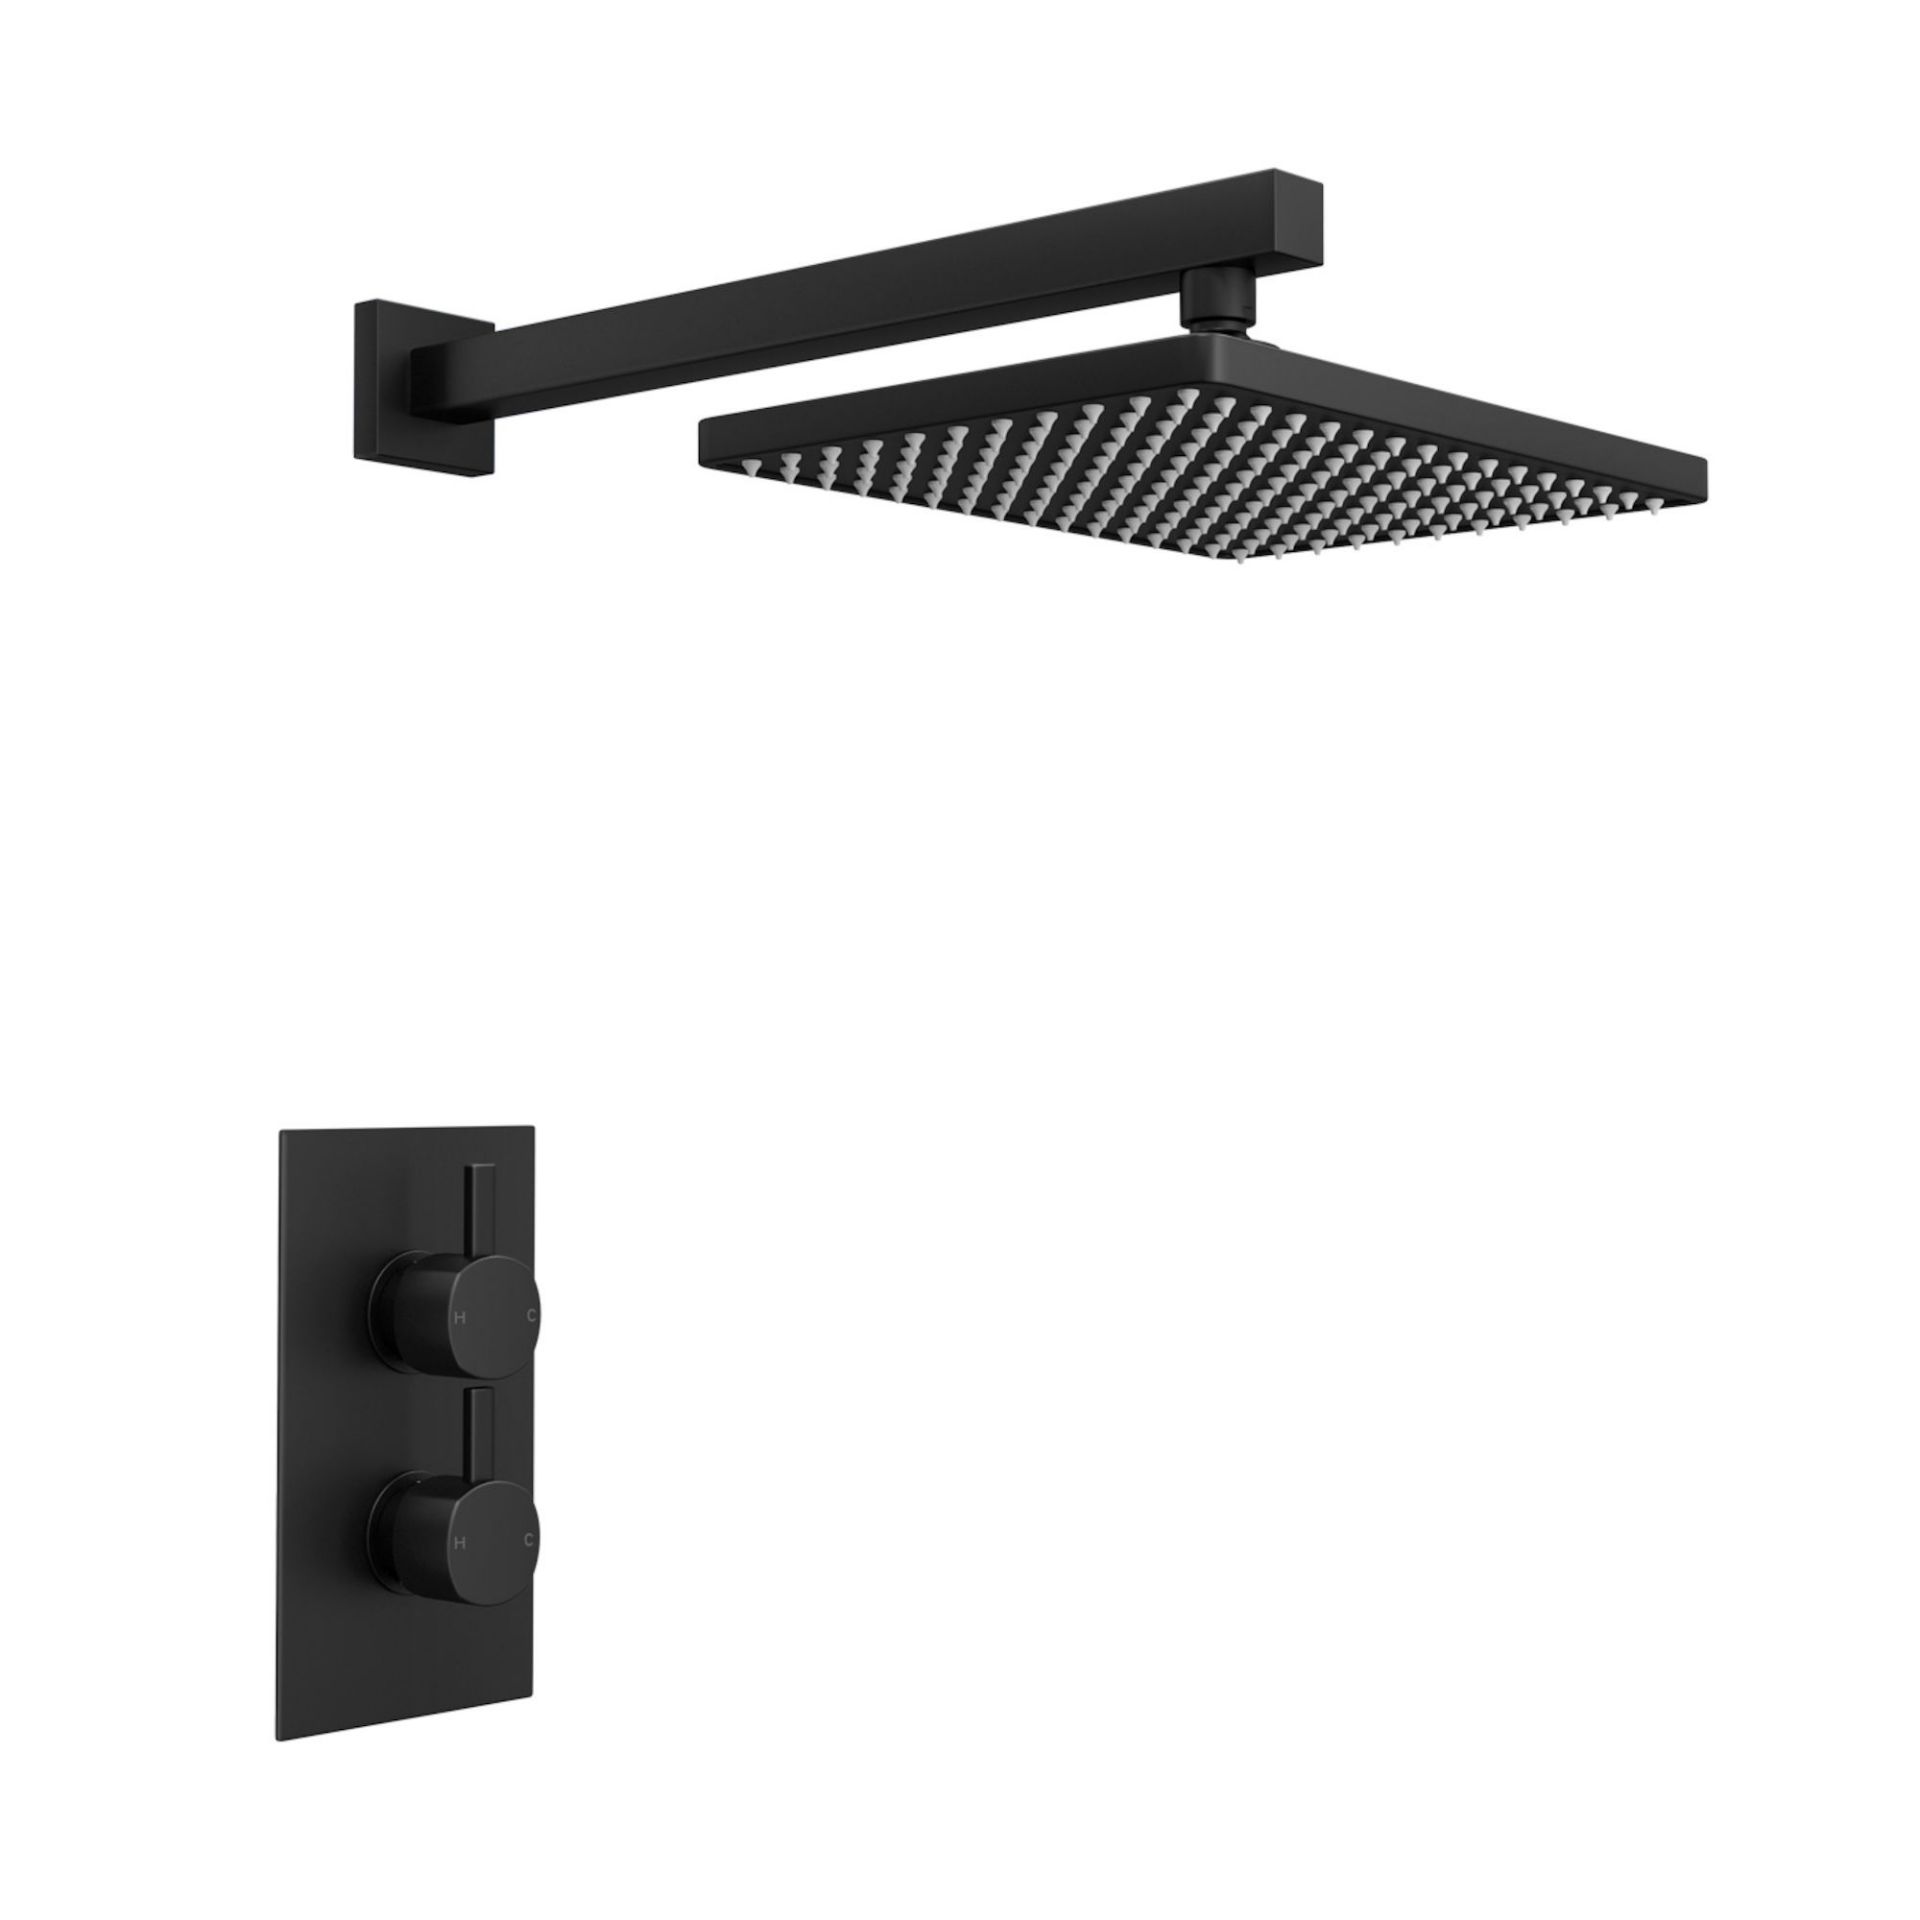 (CT203) Iker Matte Black Shower. Introducing The Hotel Collection - Everyday Eclectic Luxurious - Image 2 of 3